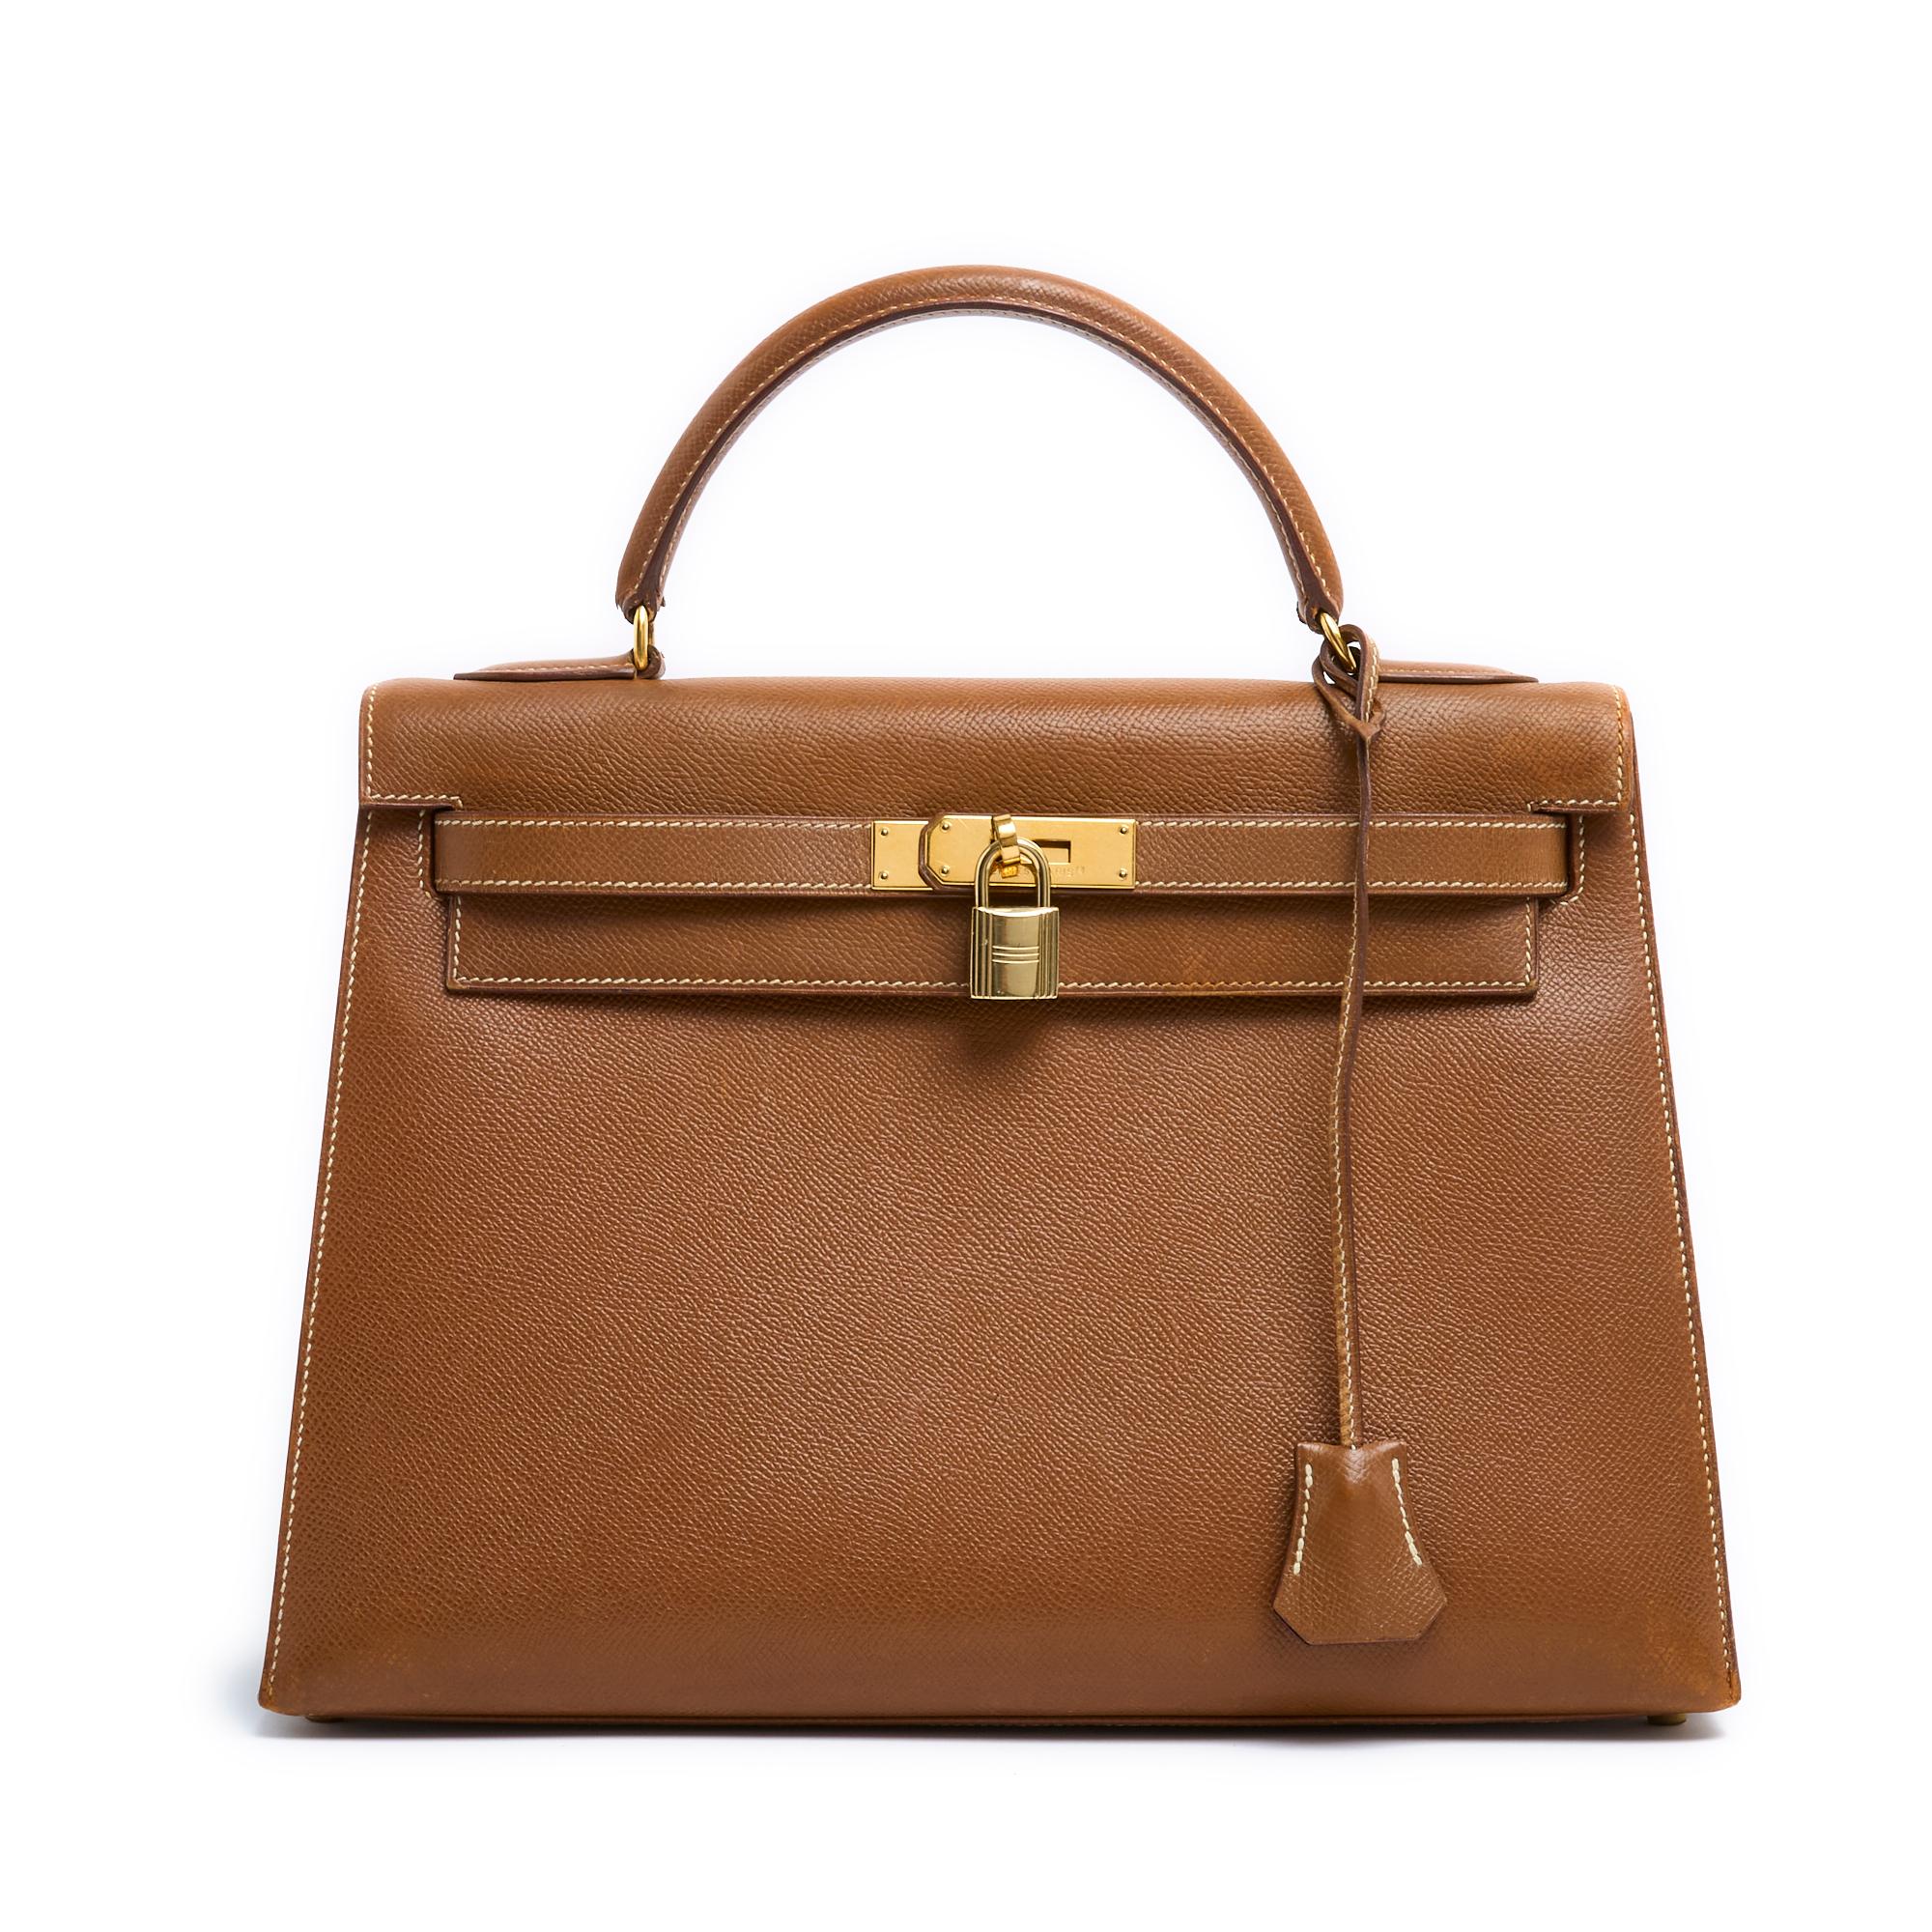 Hermès bag, Kelly model, size 32, in camel or gold grained leather and gold metal (brass), interior lined with coordinated leather with 1 large pocket closed by a zip and a leather zipper and a large double patch pocket, year 1997 and a Kelly